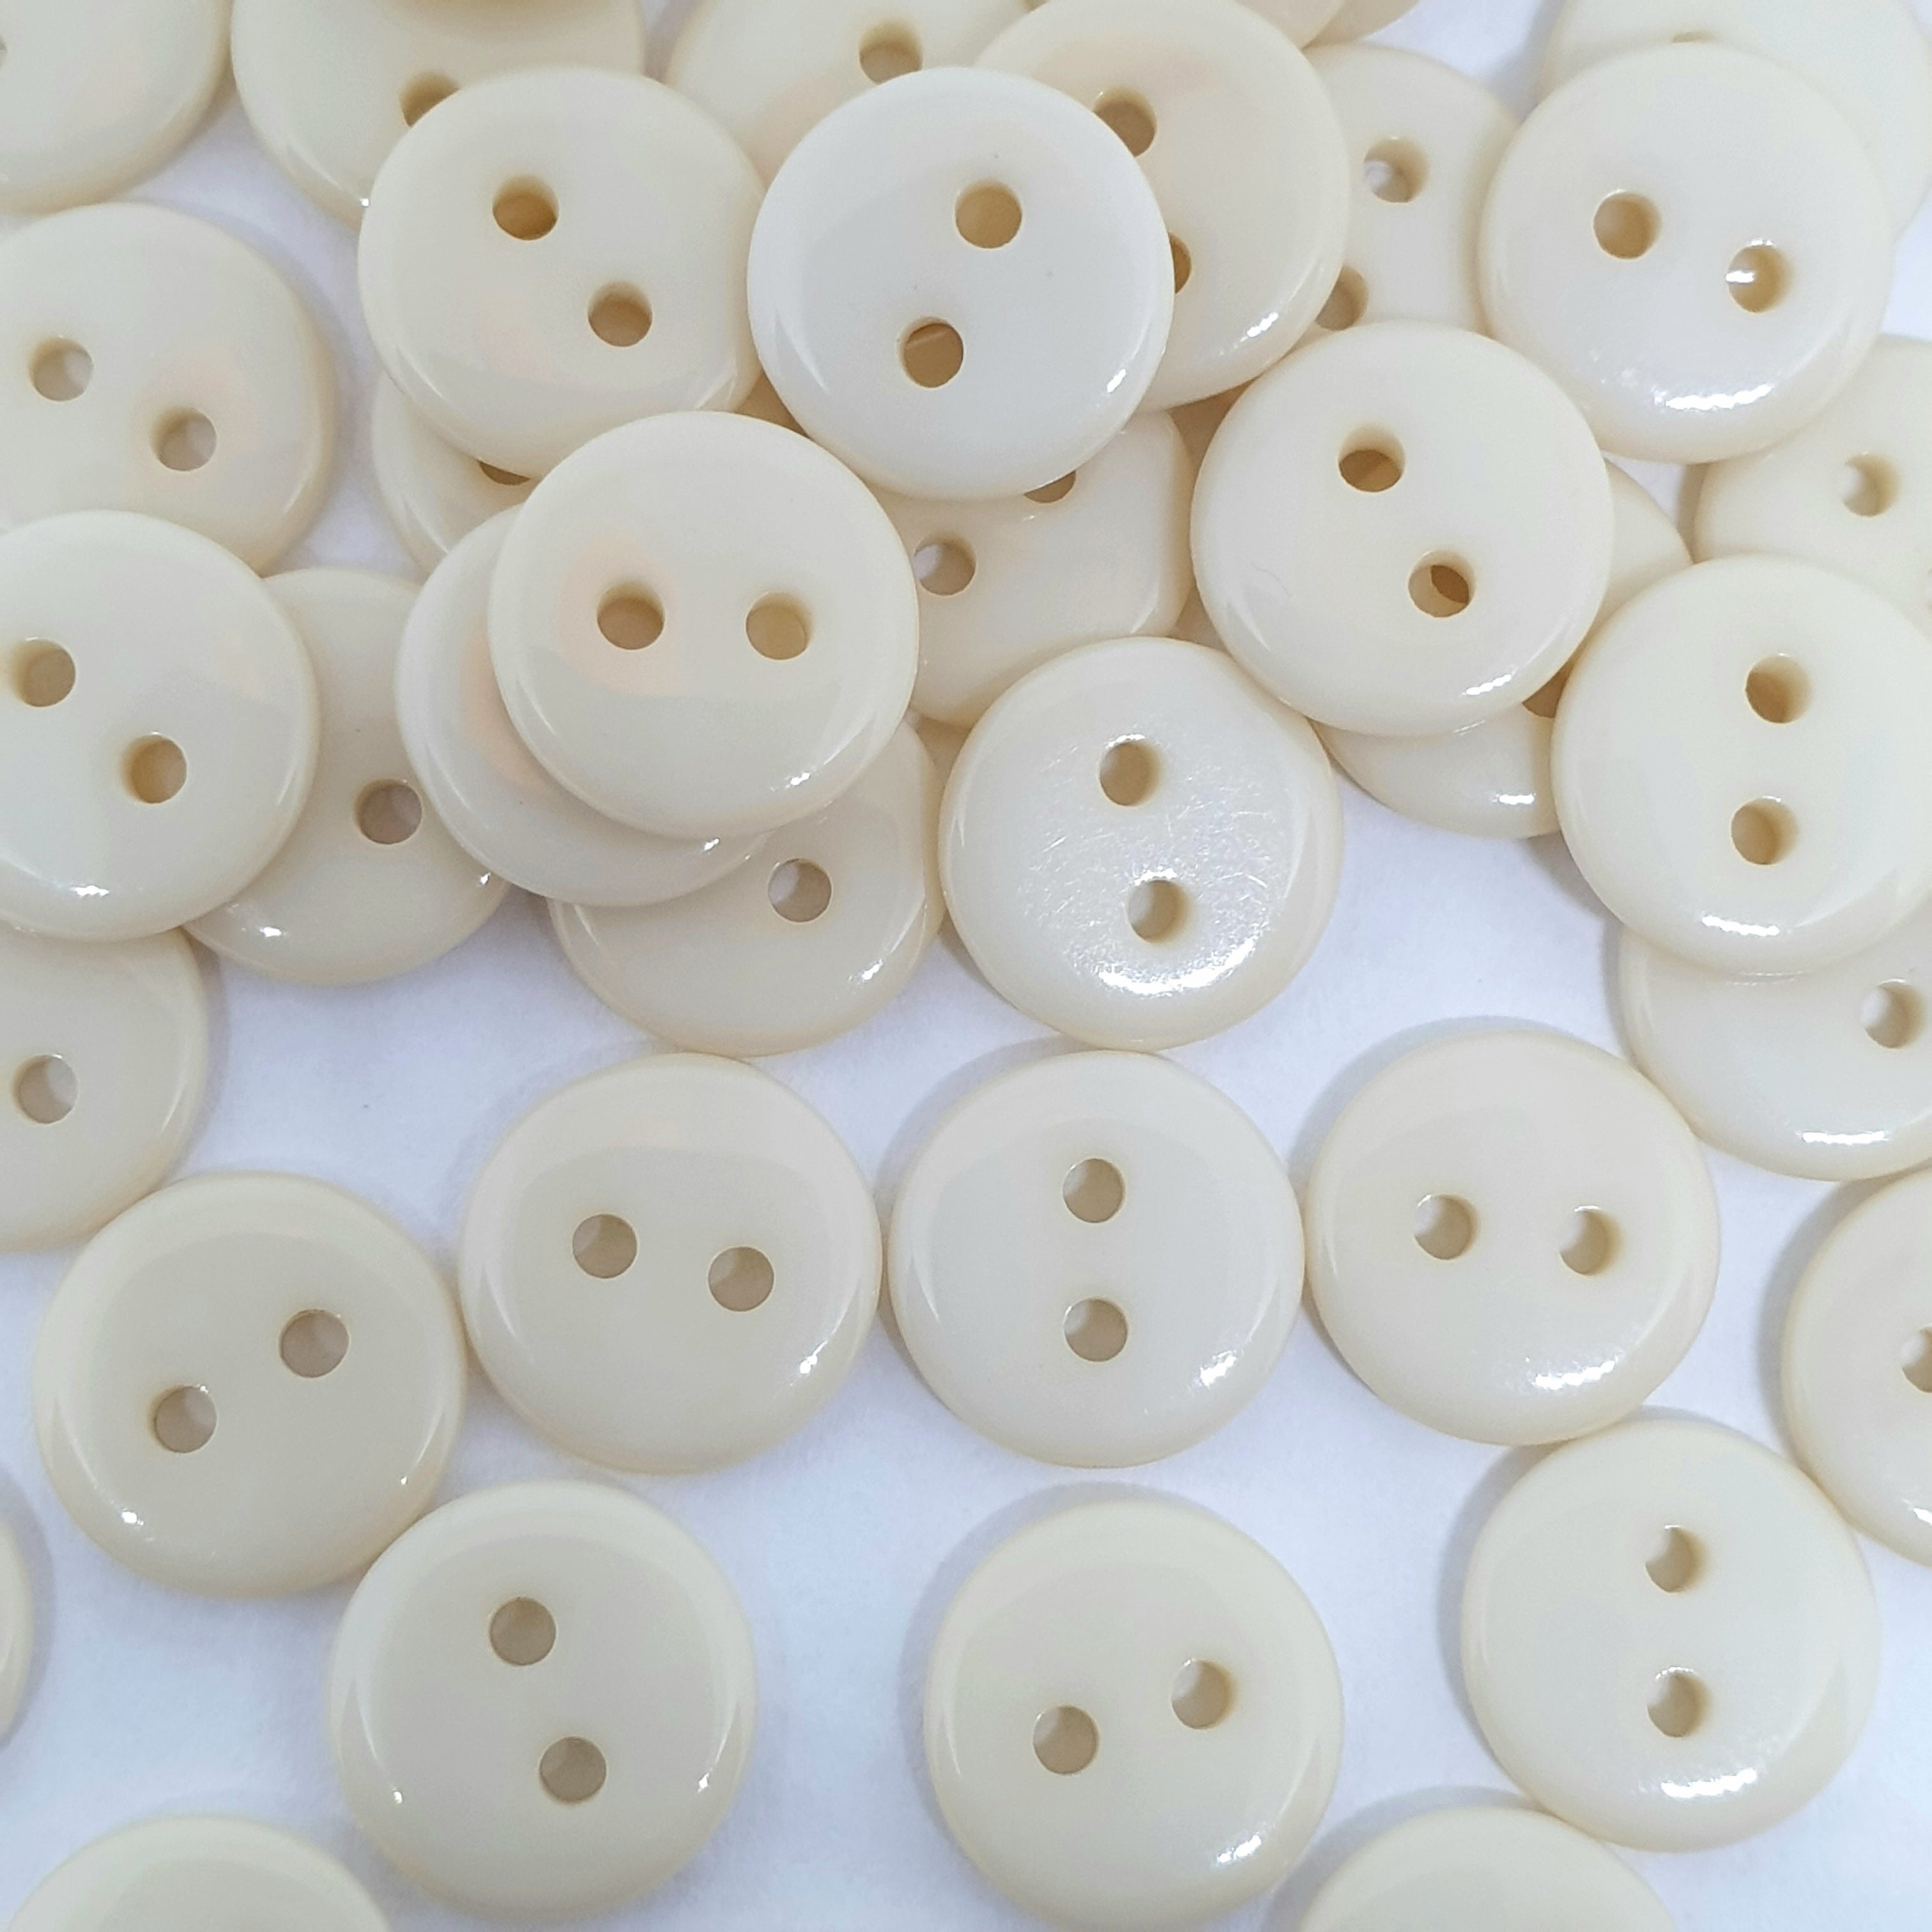 MajorCrafts 120pcs 9mm Cream Small 2 Holes Round Resin Sewing Buttons B23